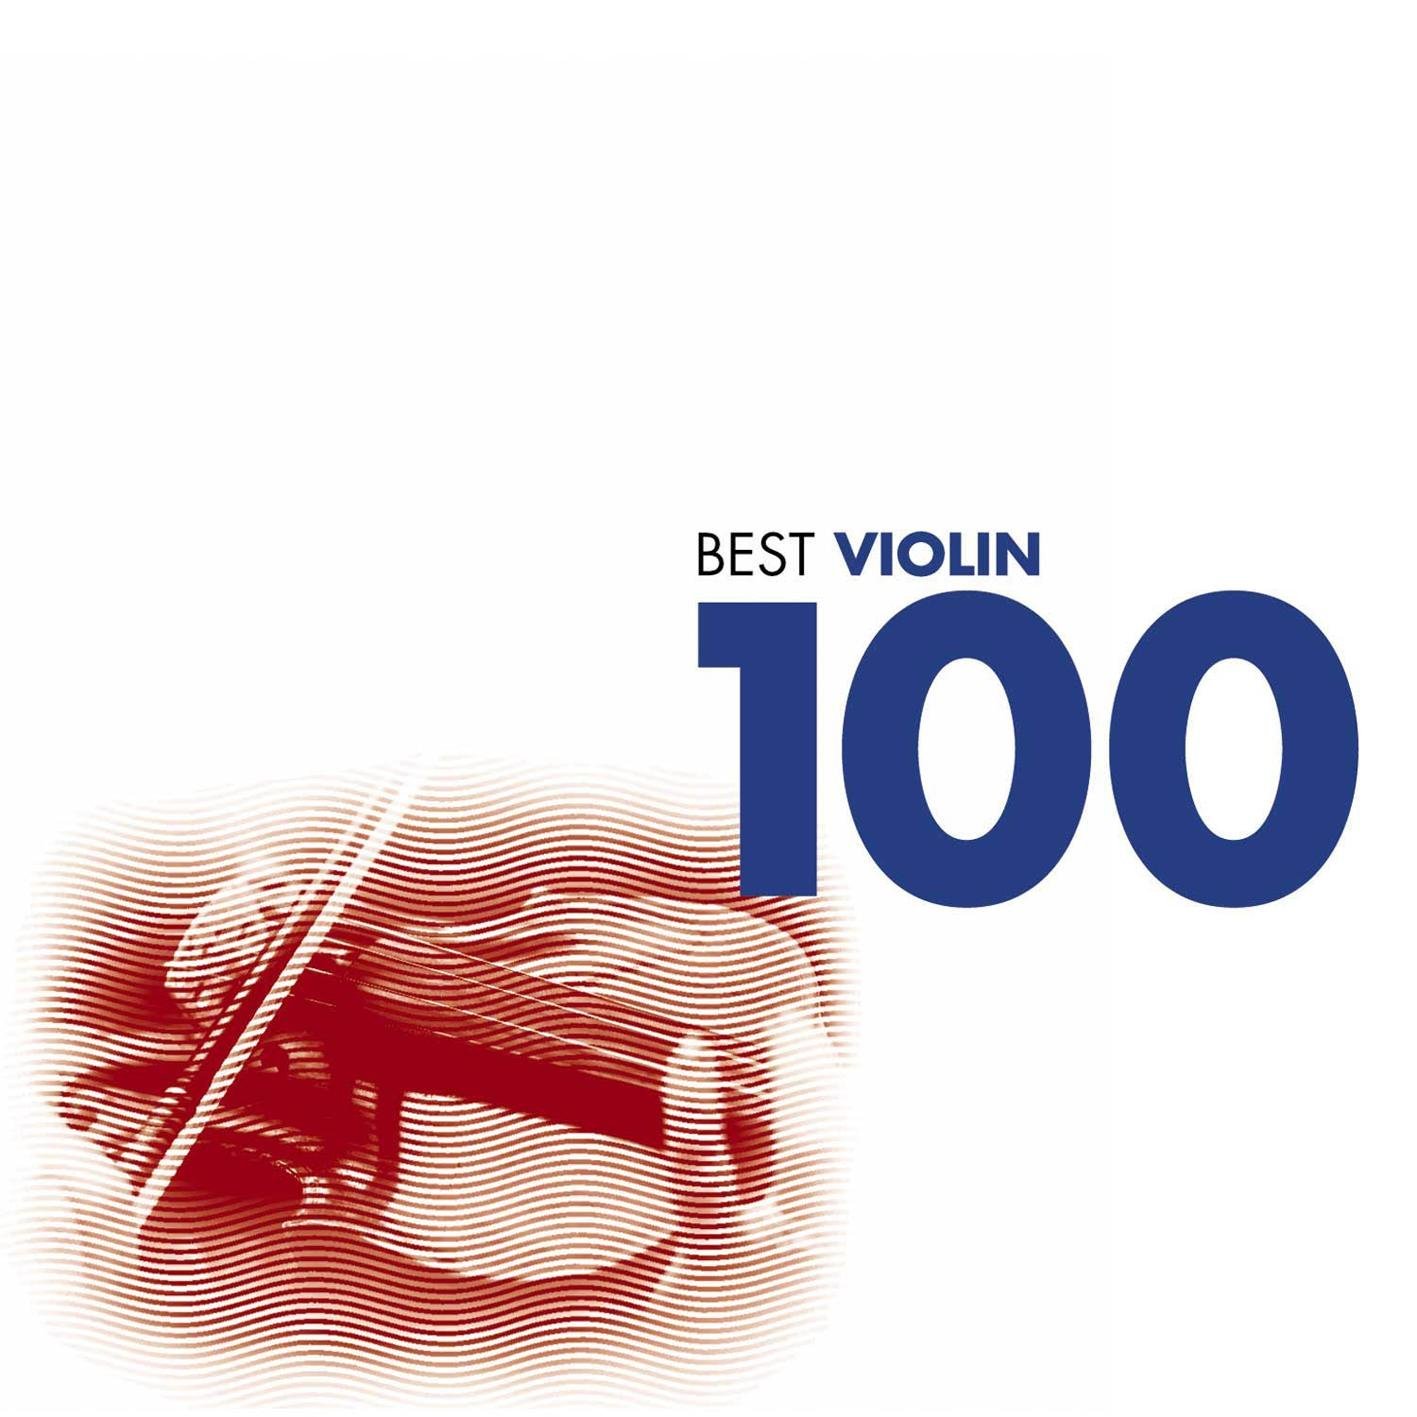 Flac 2010. The 100 best. Viola 100. Beethoven - the best 100 [6cd] mp3.